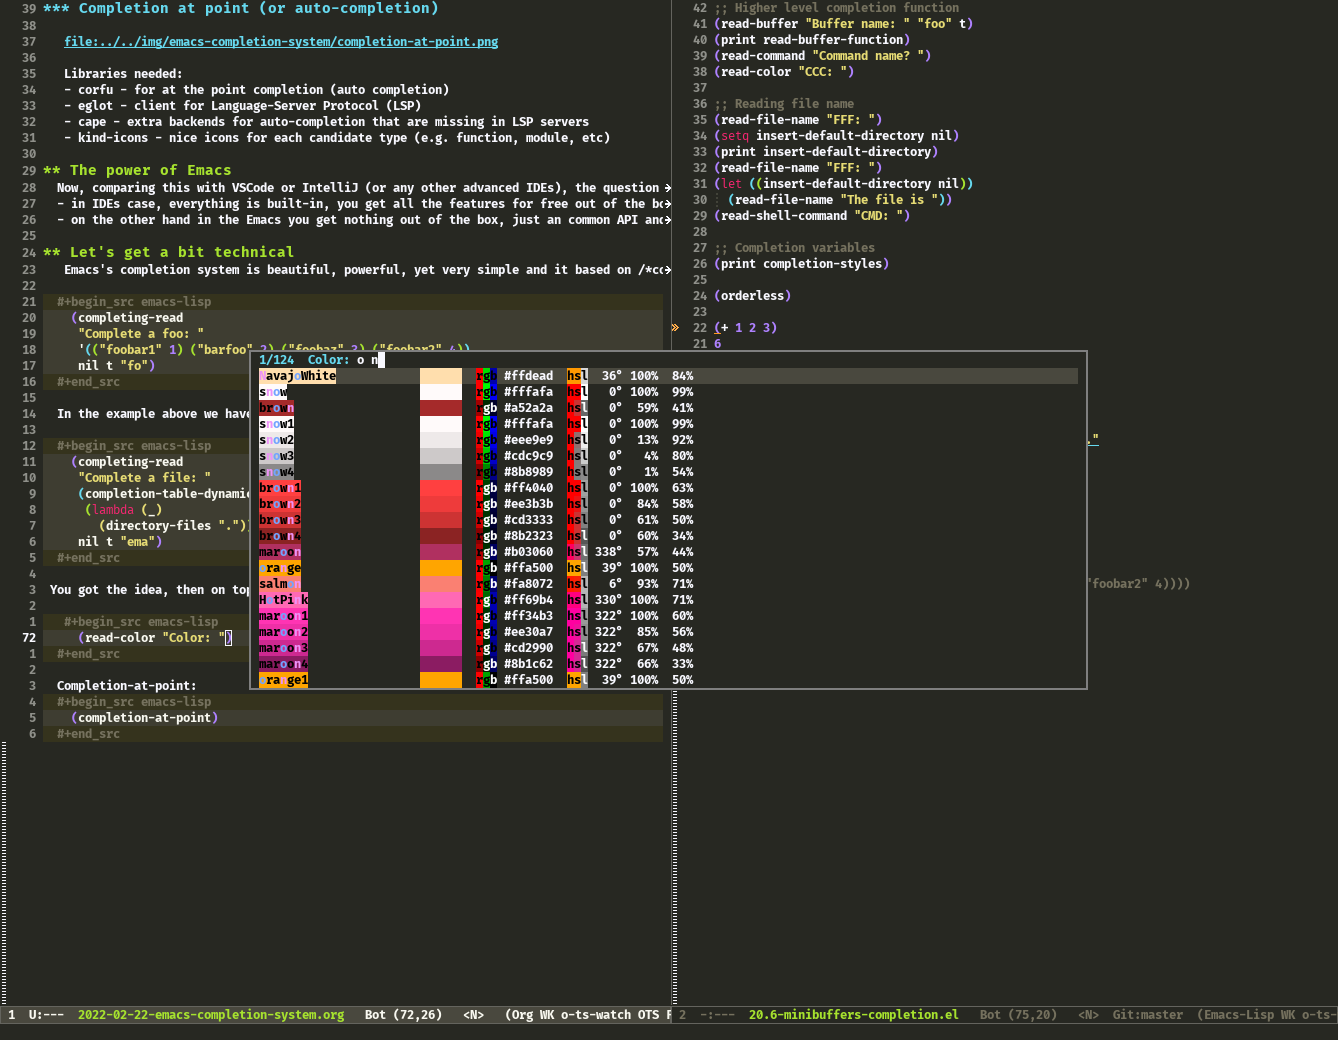 ../../img/emacs-completion-system/completing-color.png